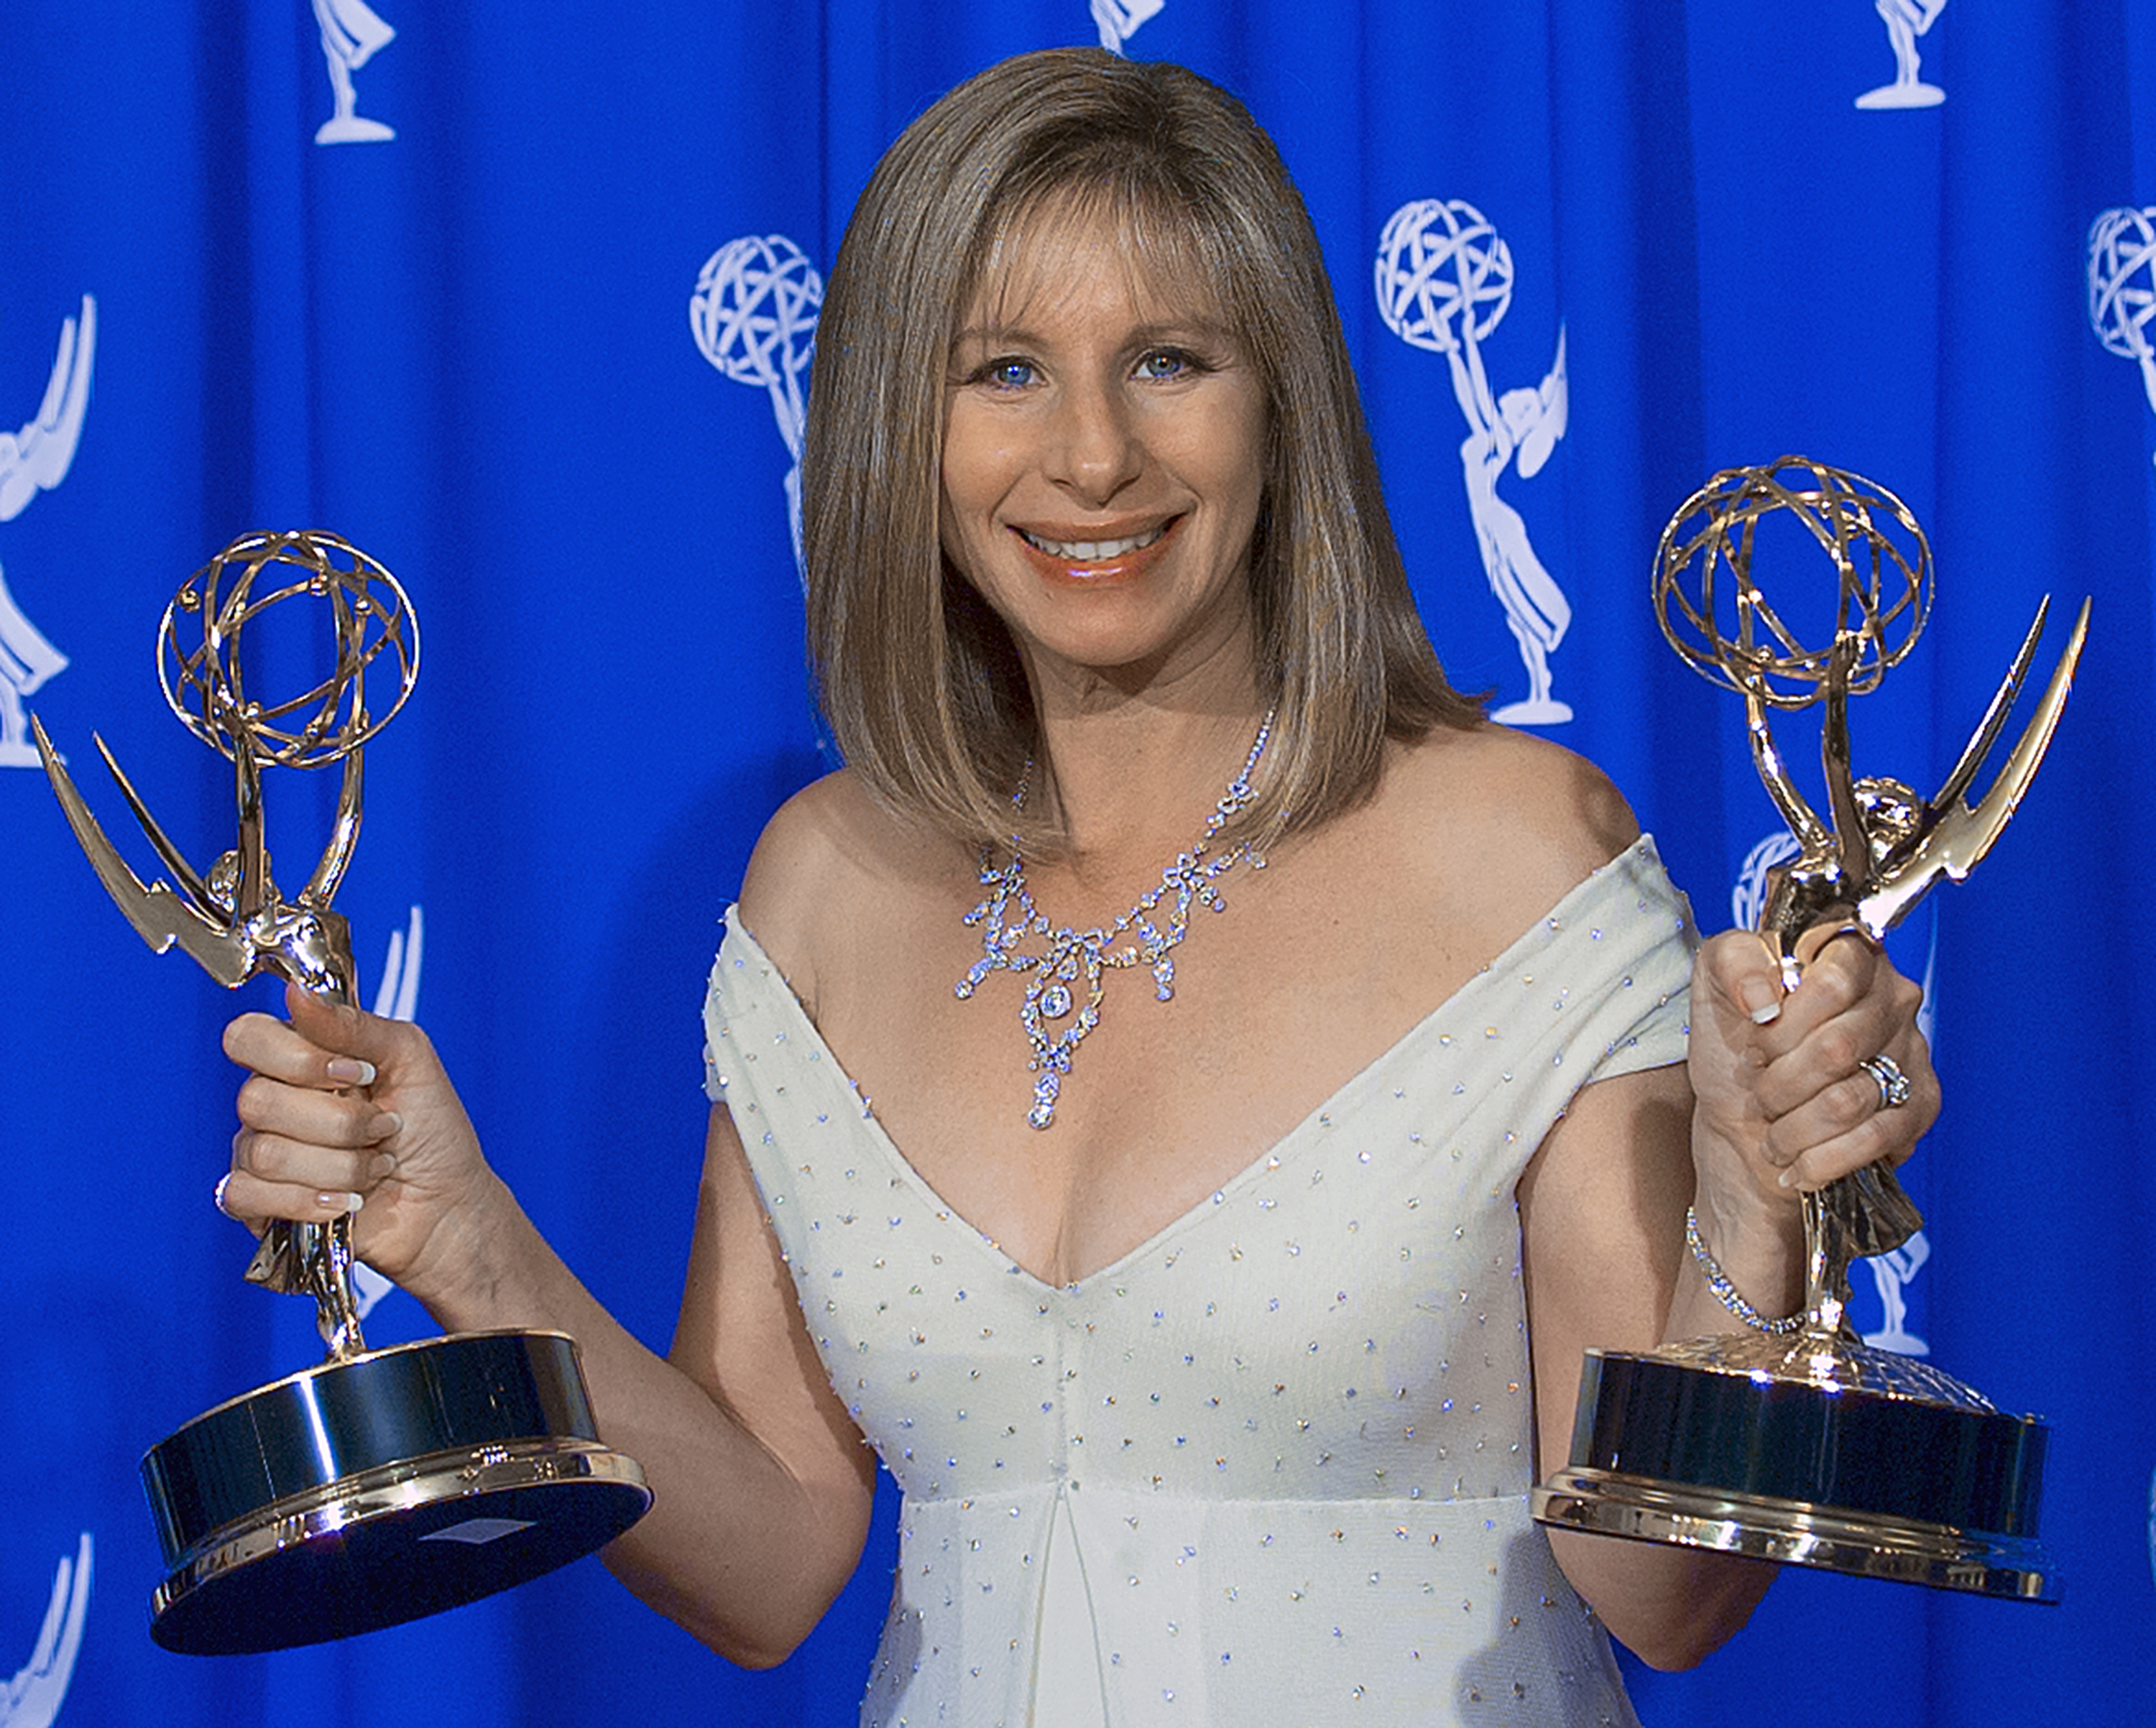 Barbra Streisand at the 47th Primetime Emmy Awards on September 10, 1995 in Pasadena, California. | Source: Getty Images